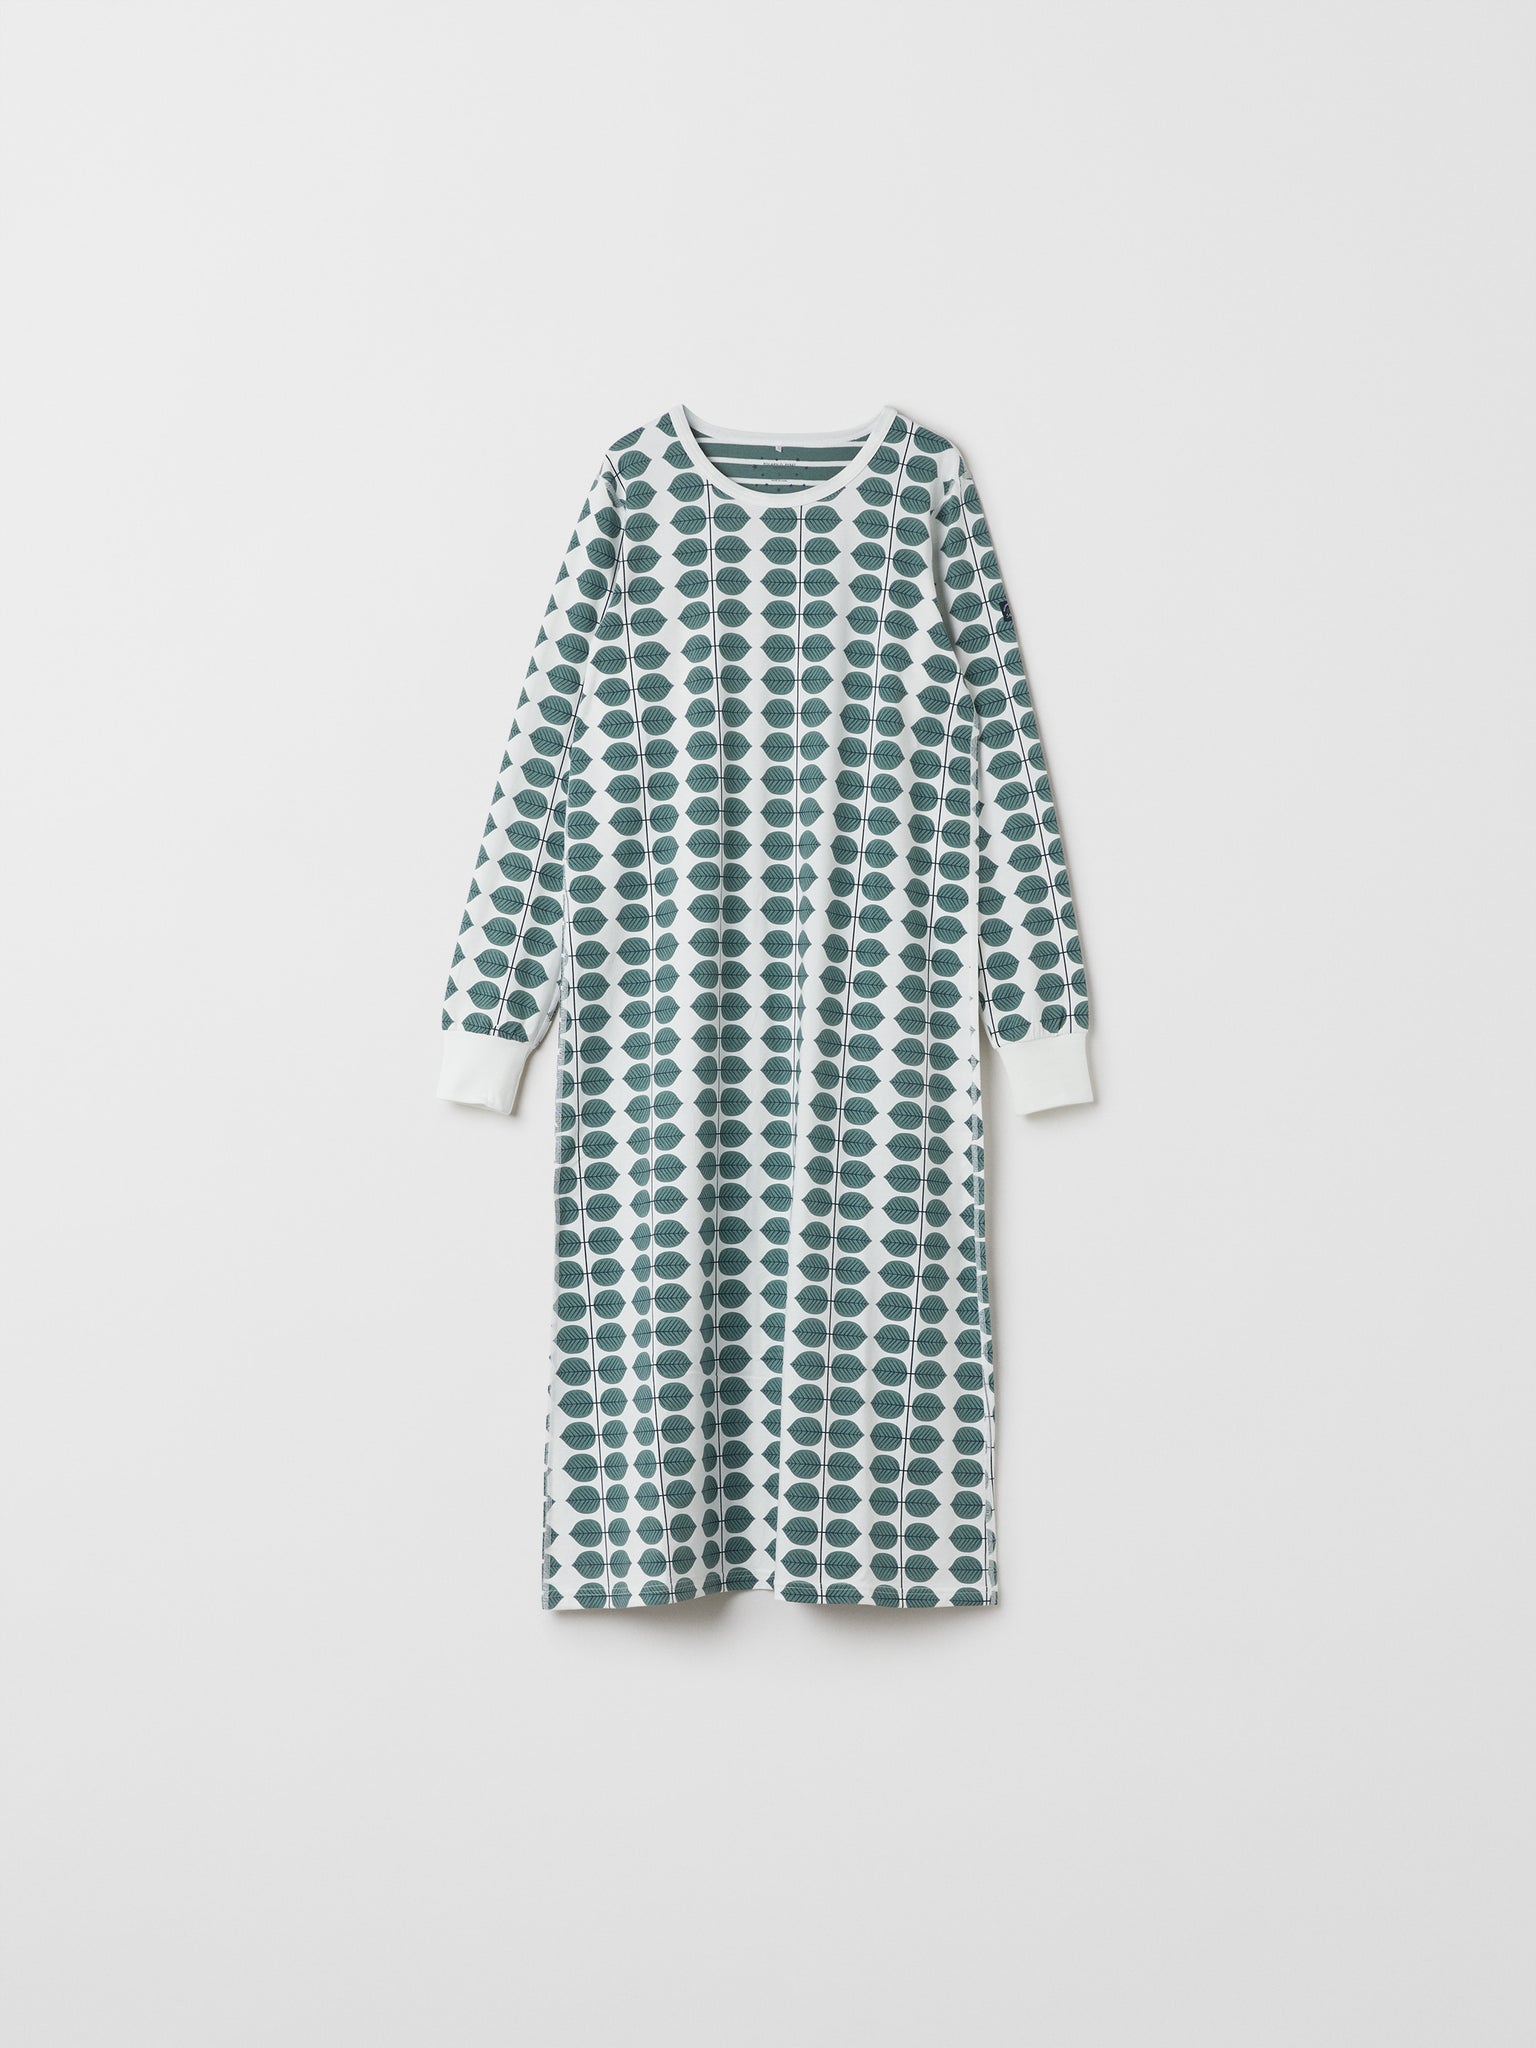 Organic Cotton Scandi Adult Nightdress from the Polarn O. Pyret adult collection. Clothes made using sustainably sourced materials.